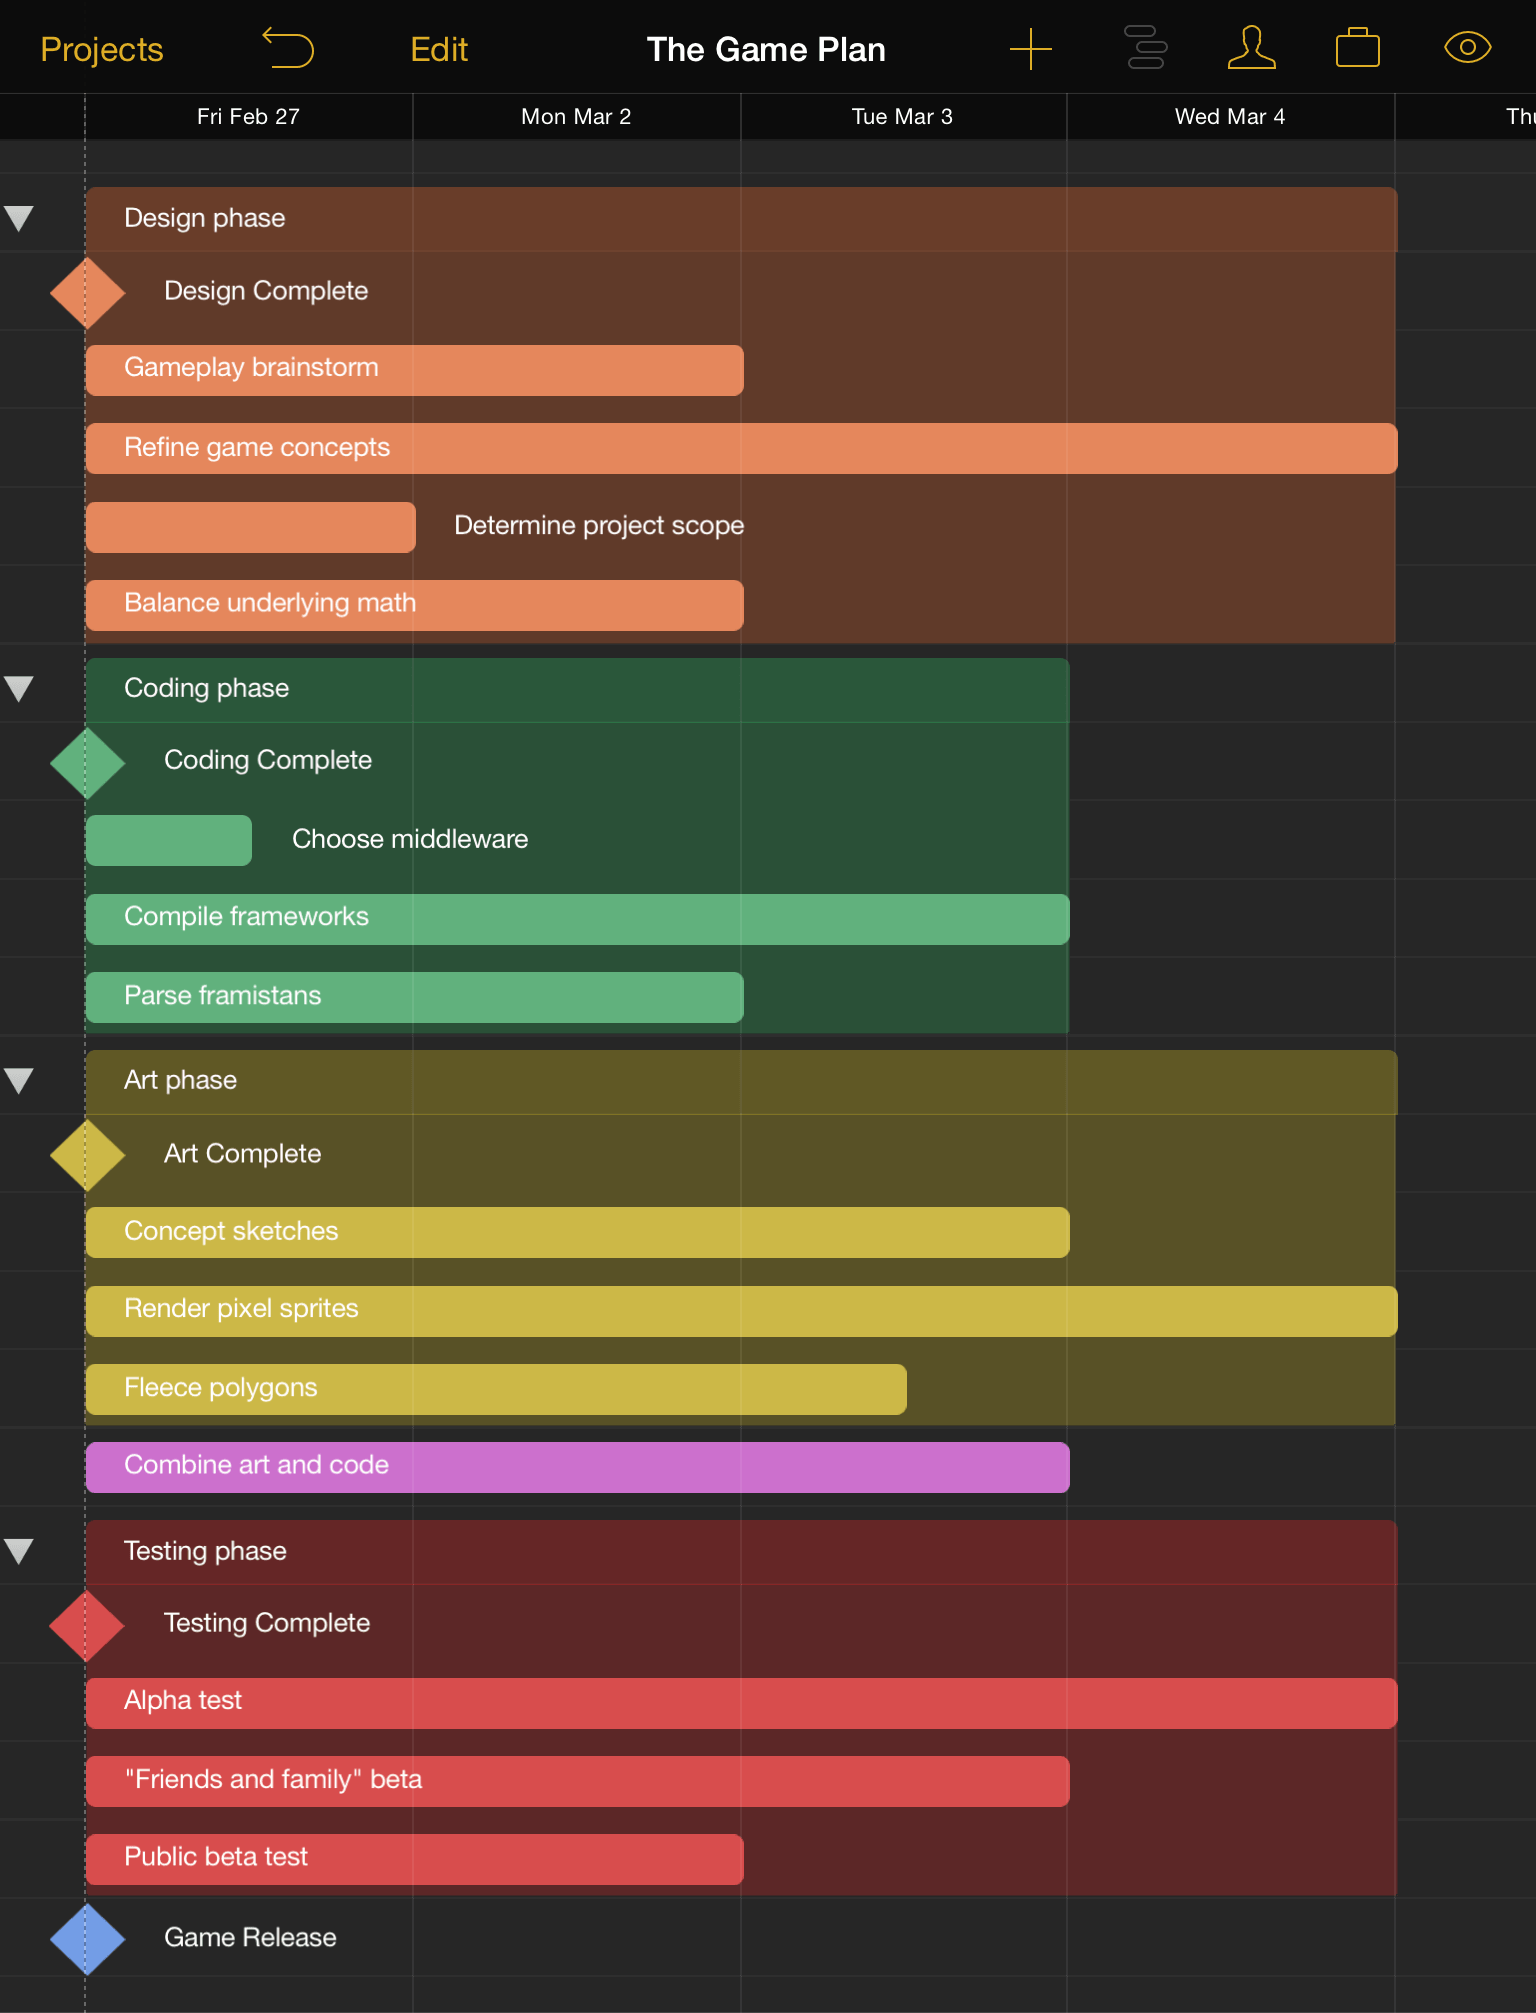 The project with groups, color styles, and task durations.